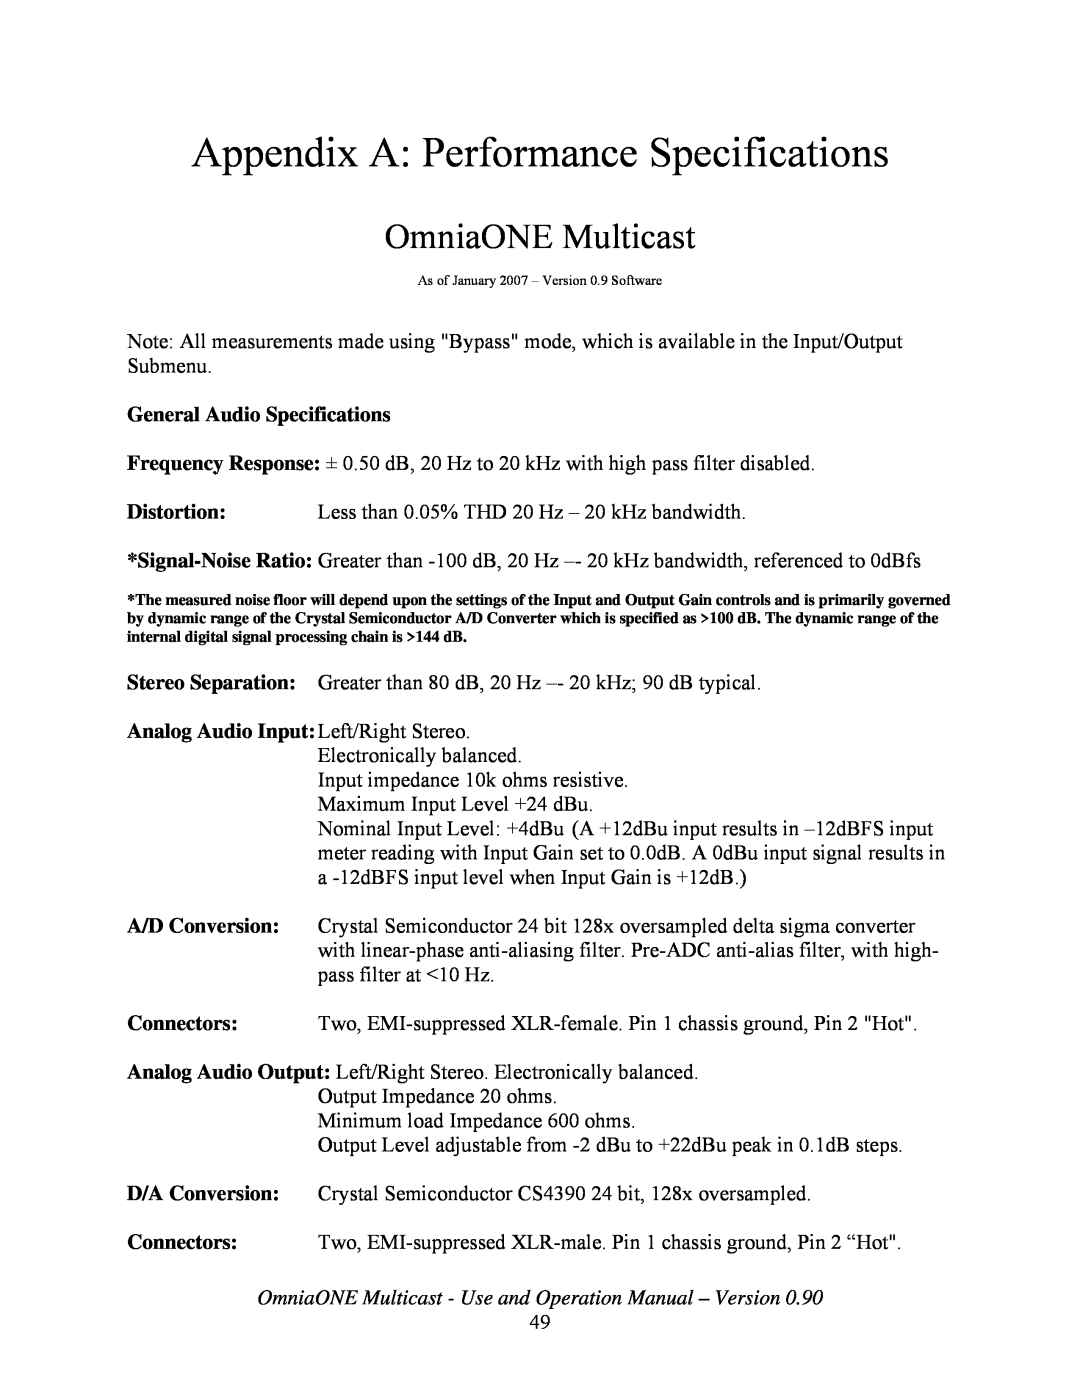 New Media Technology Omnia ONE Multicast manual Appendix A Performance Specifications, OmniaONE Multicast 